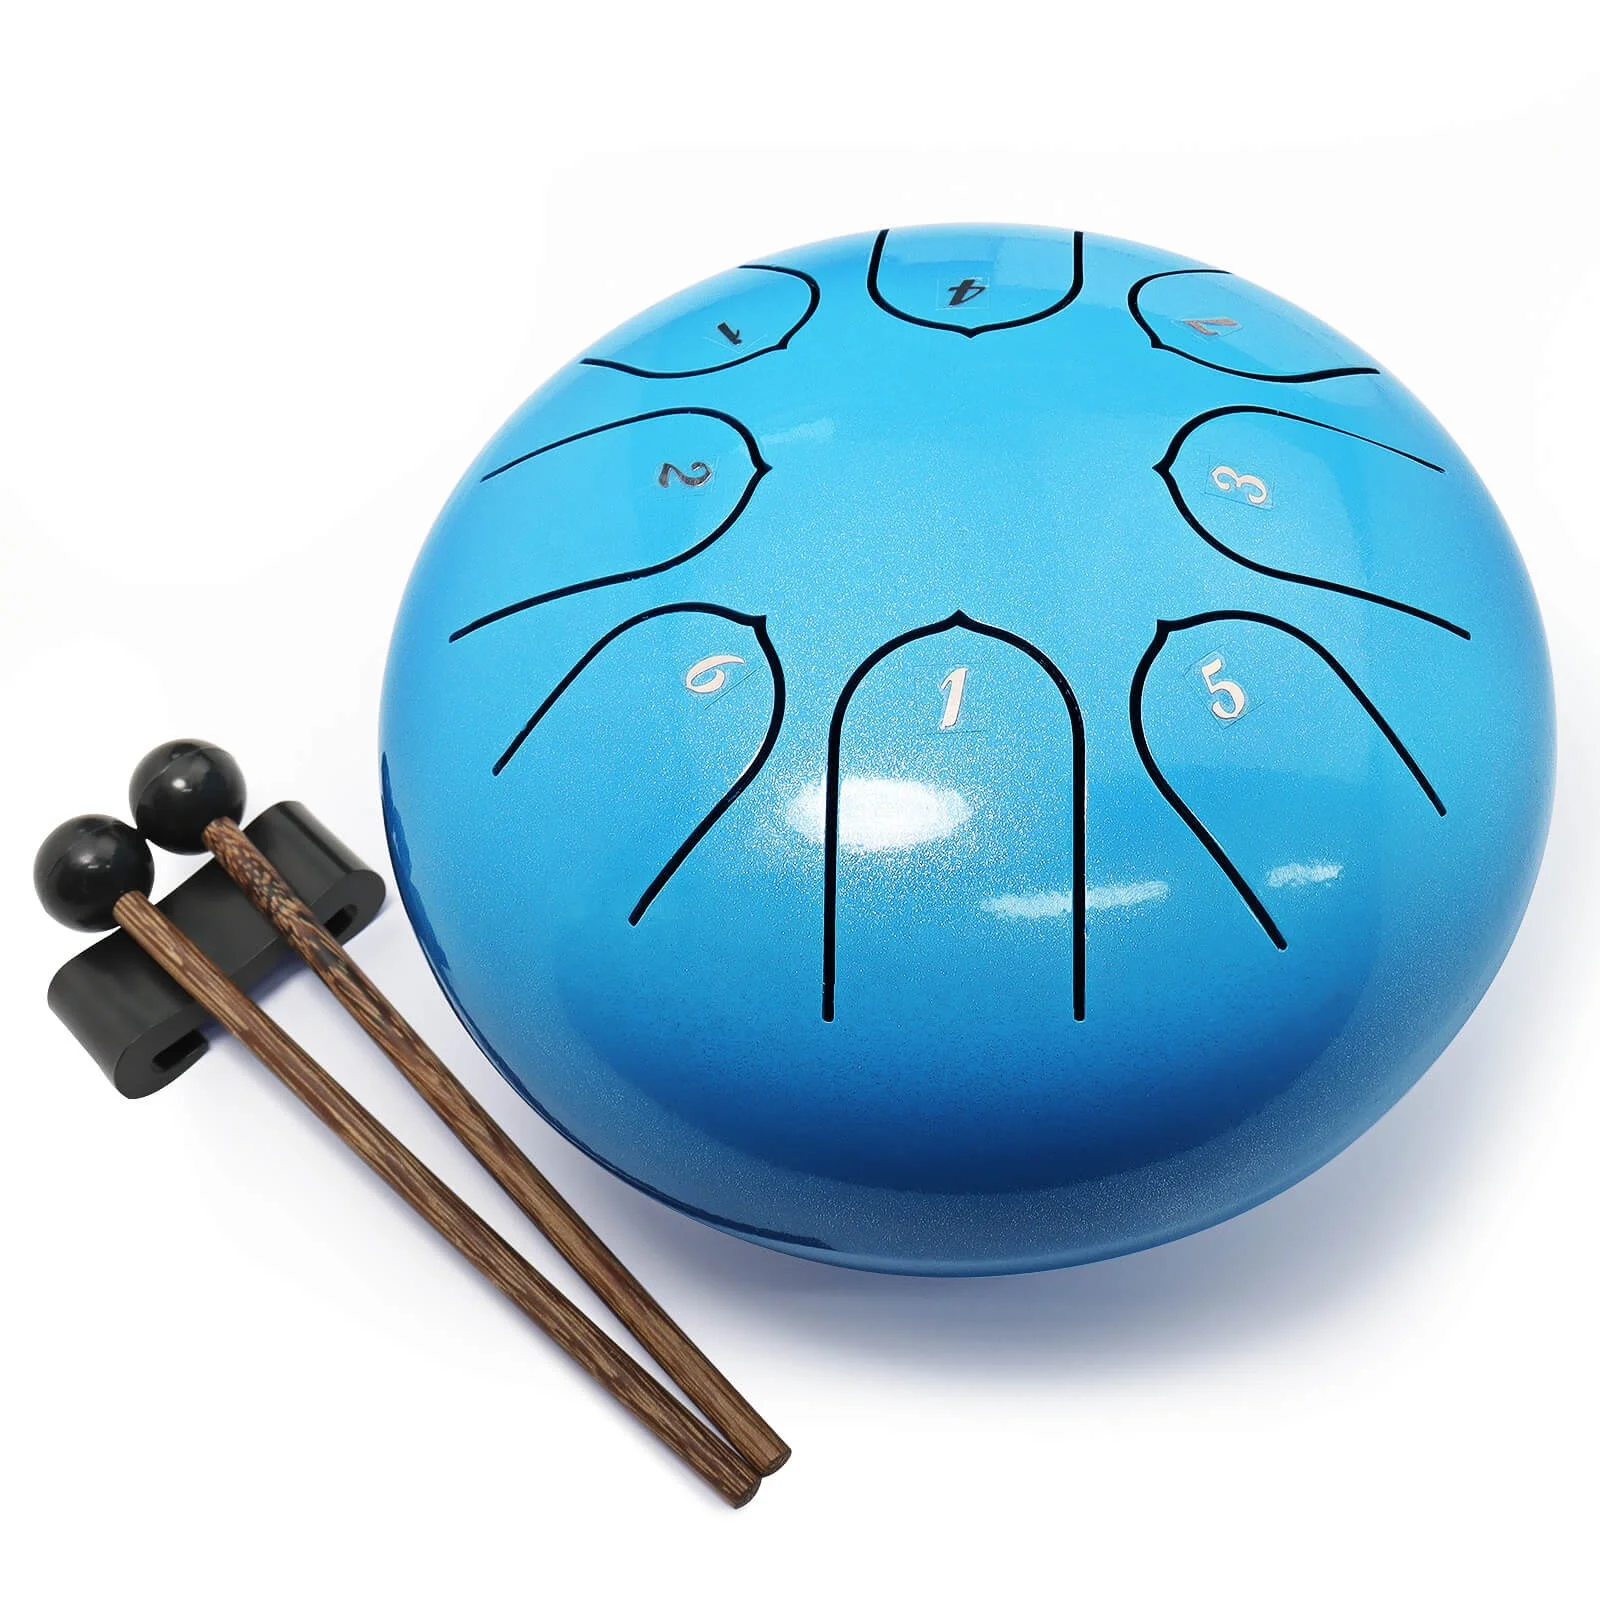 Black ANER Steel Tongue Drum 6inch Mini Instrument Hand Pan Portable Gift Rhythm und 8 Tune Ethereal Yoga Meditation Mind Healing Music Education with 2 Drumsticks 